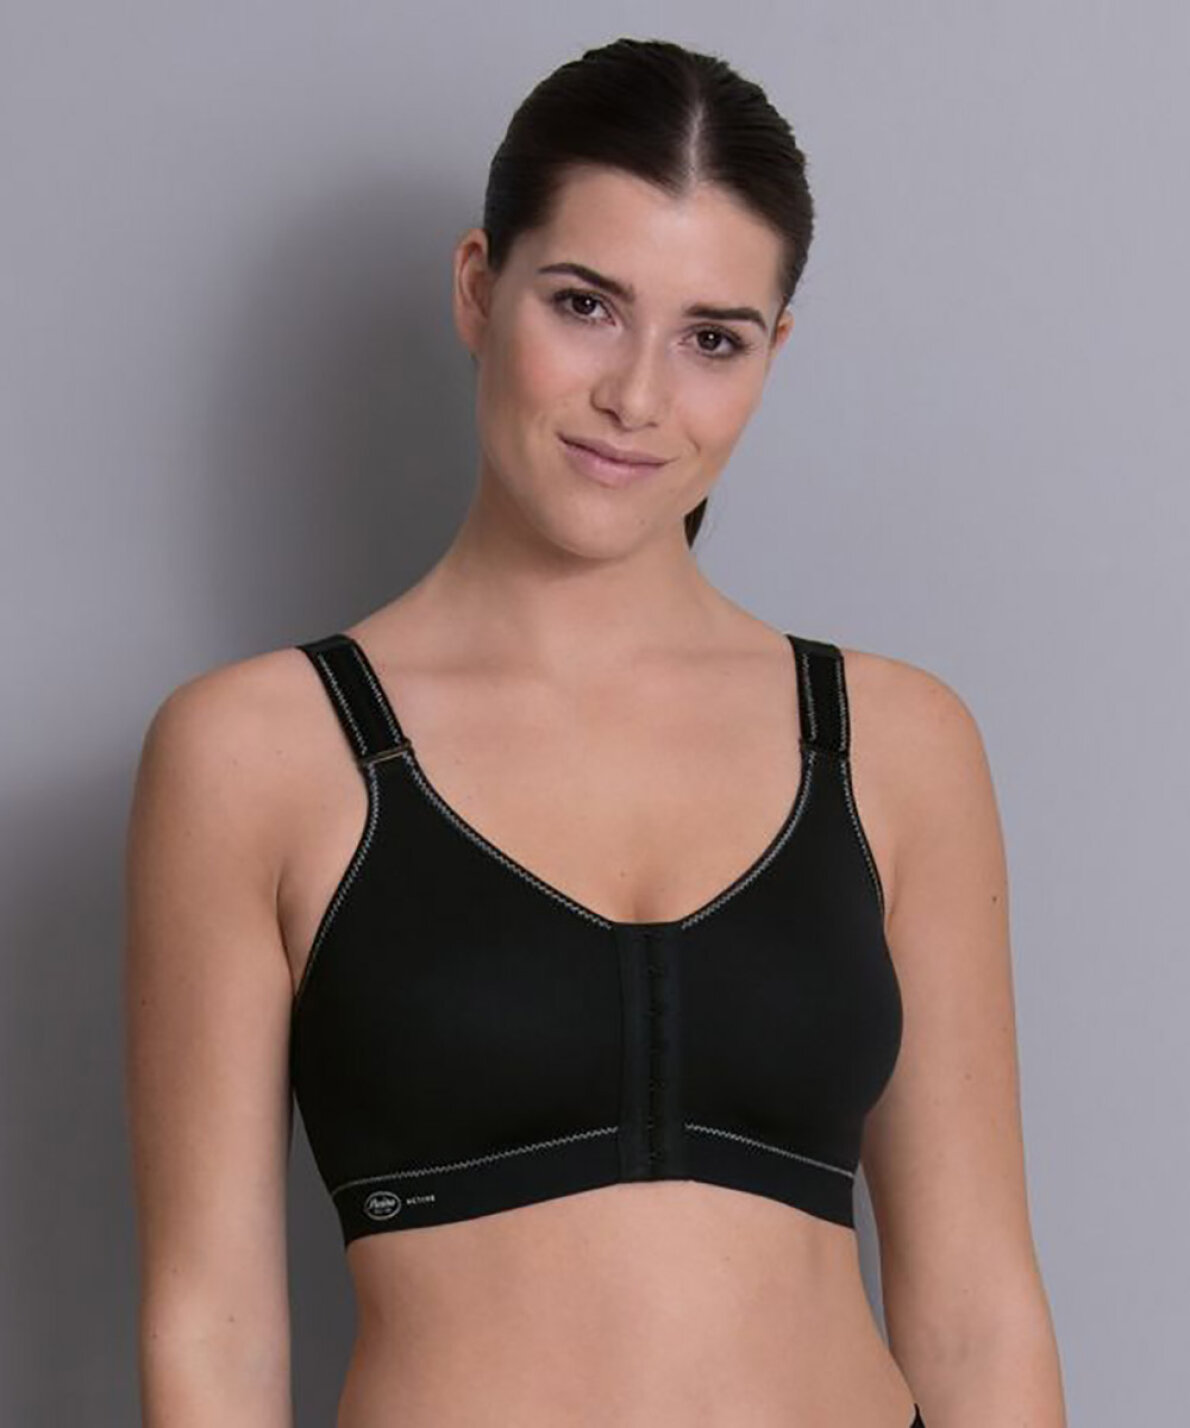 Anita Active Firm Support Front Closure Sports Bra